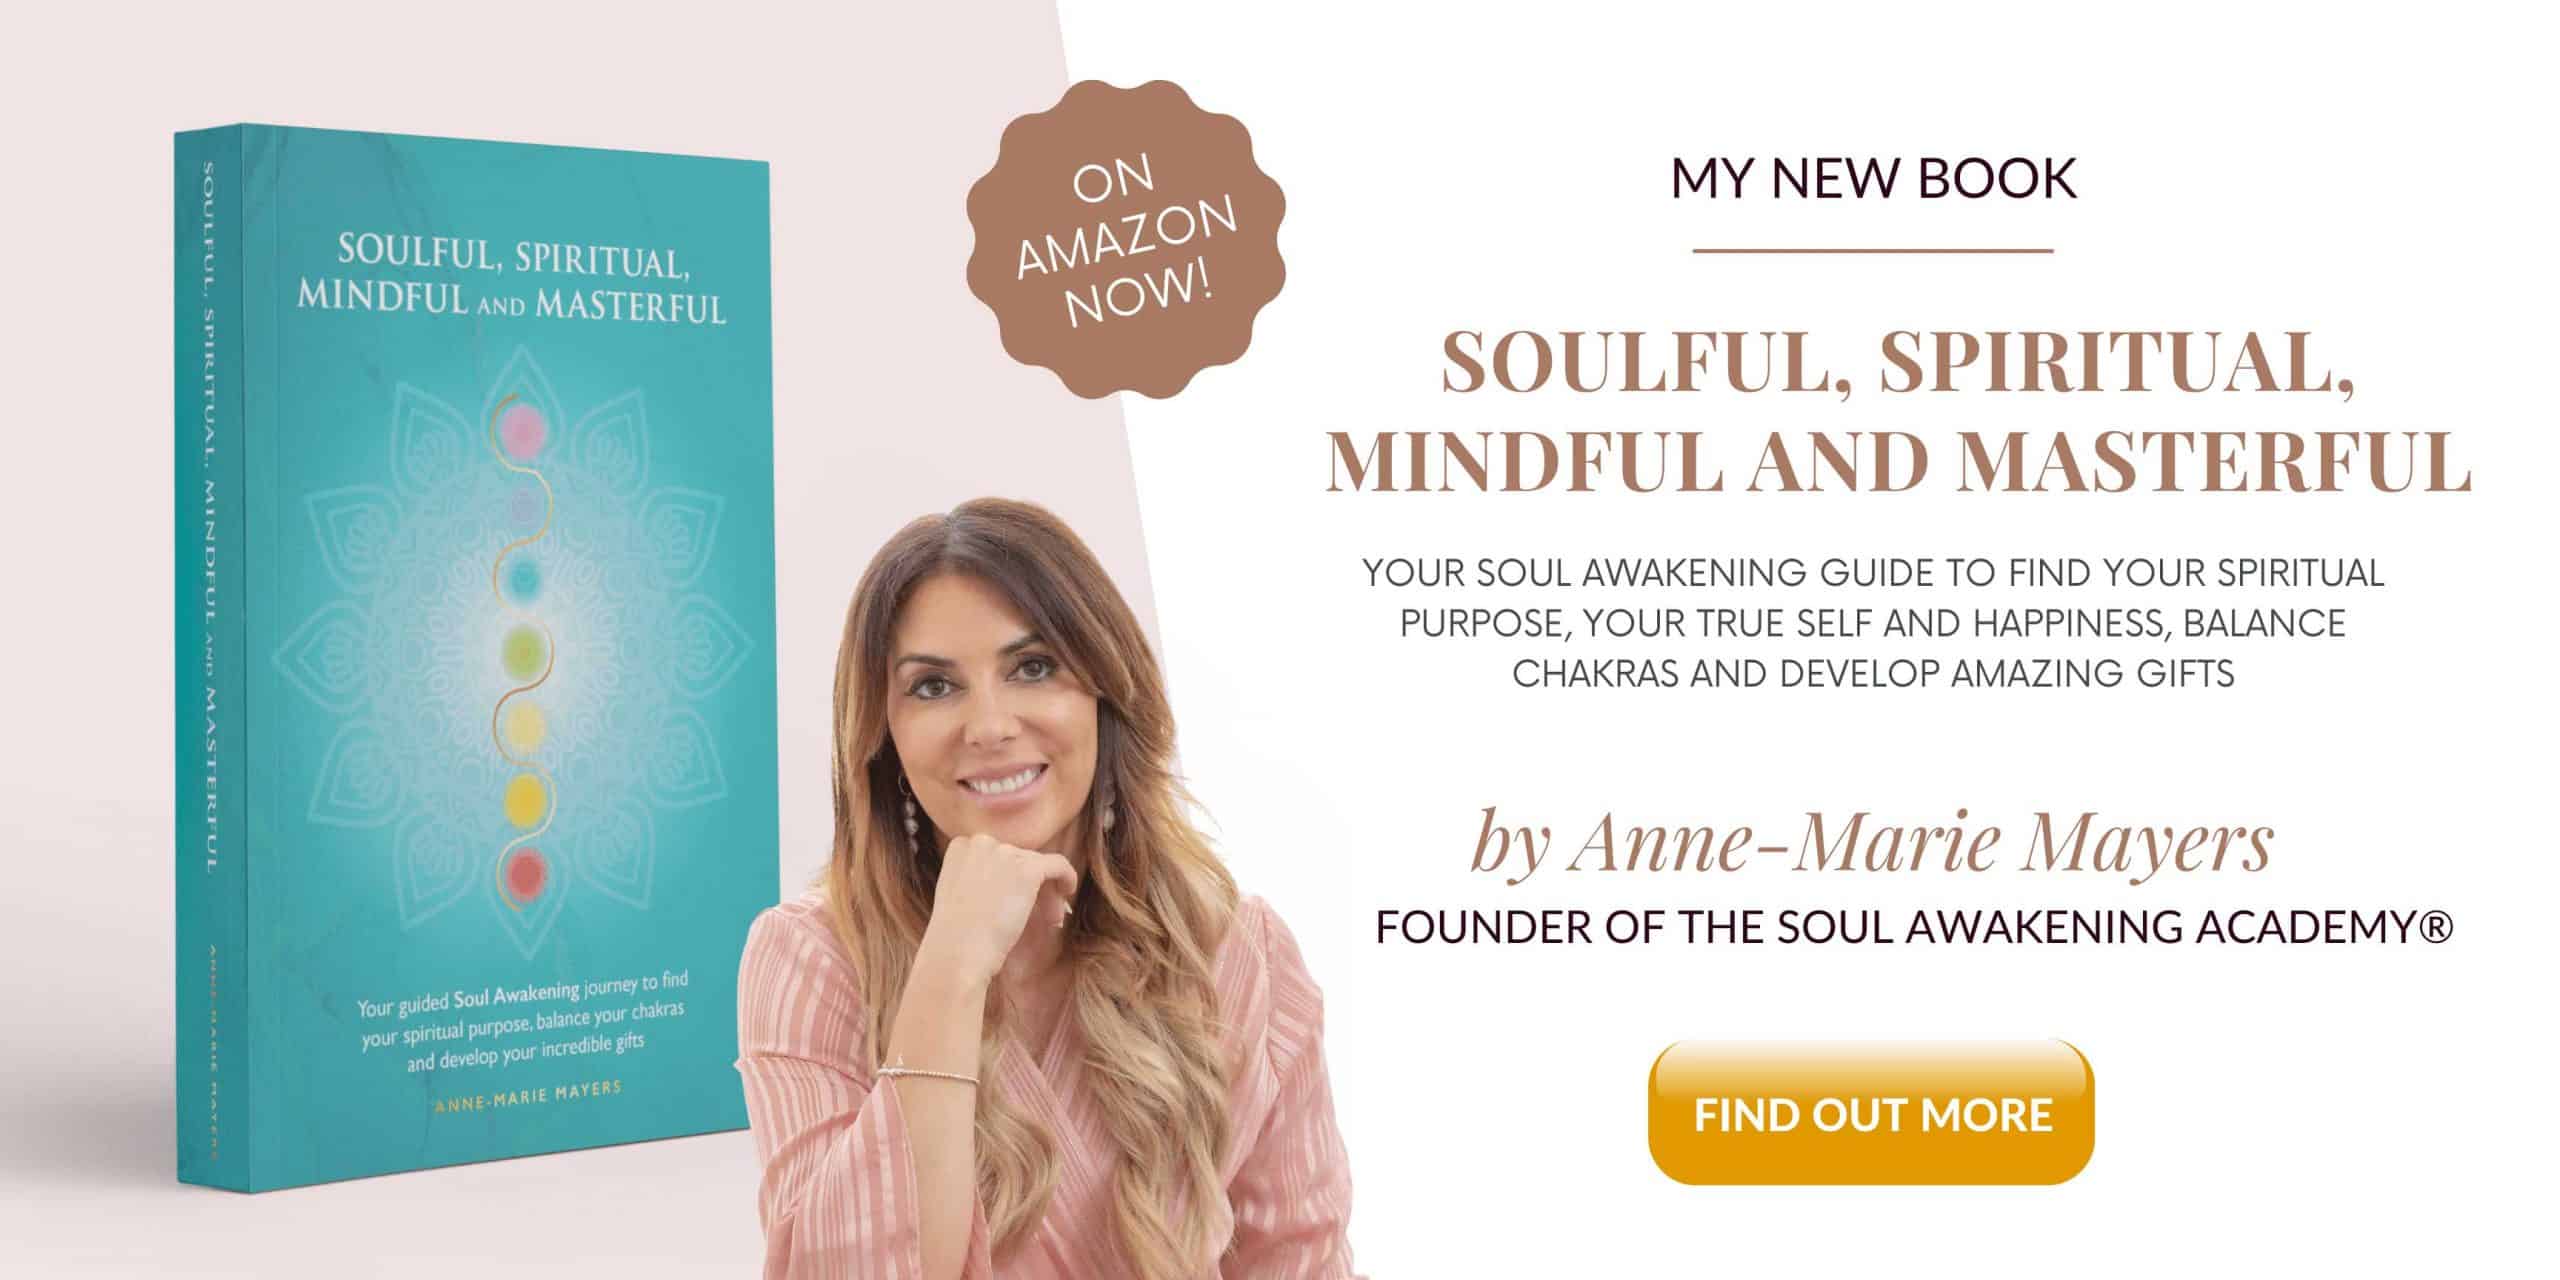 Soulful, Spiritual, Mindful and Masterful book by Anne-Marie Mayers | Soul Awakening Academy